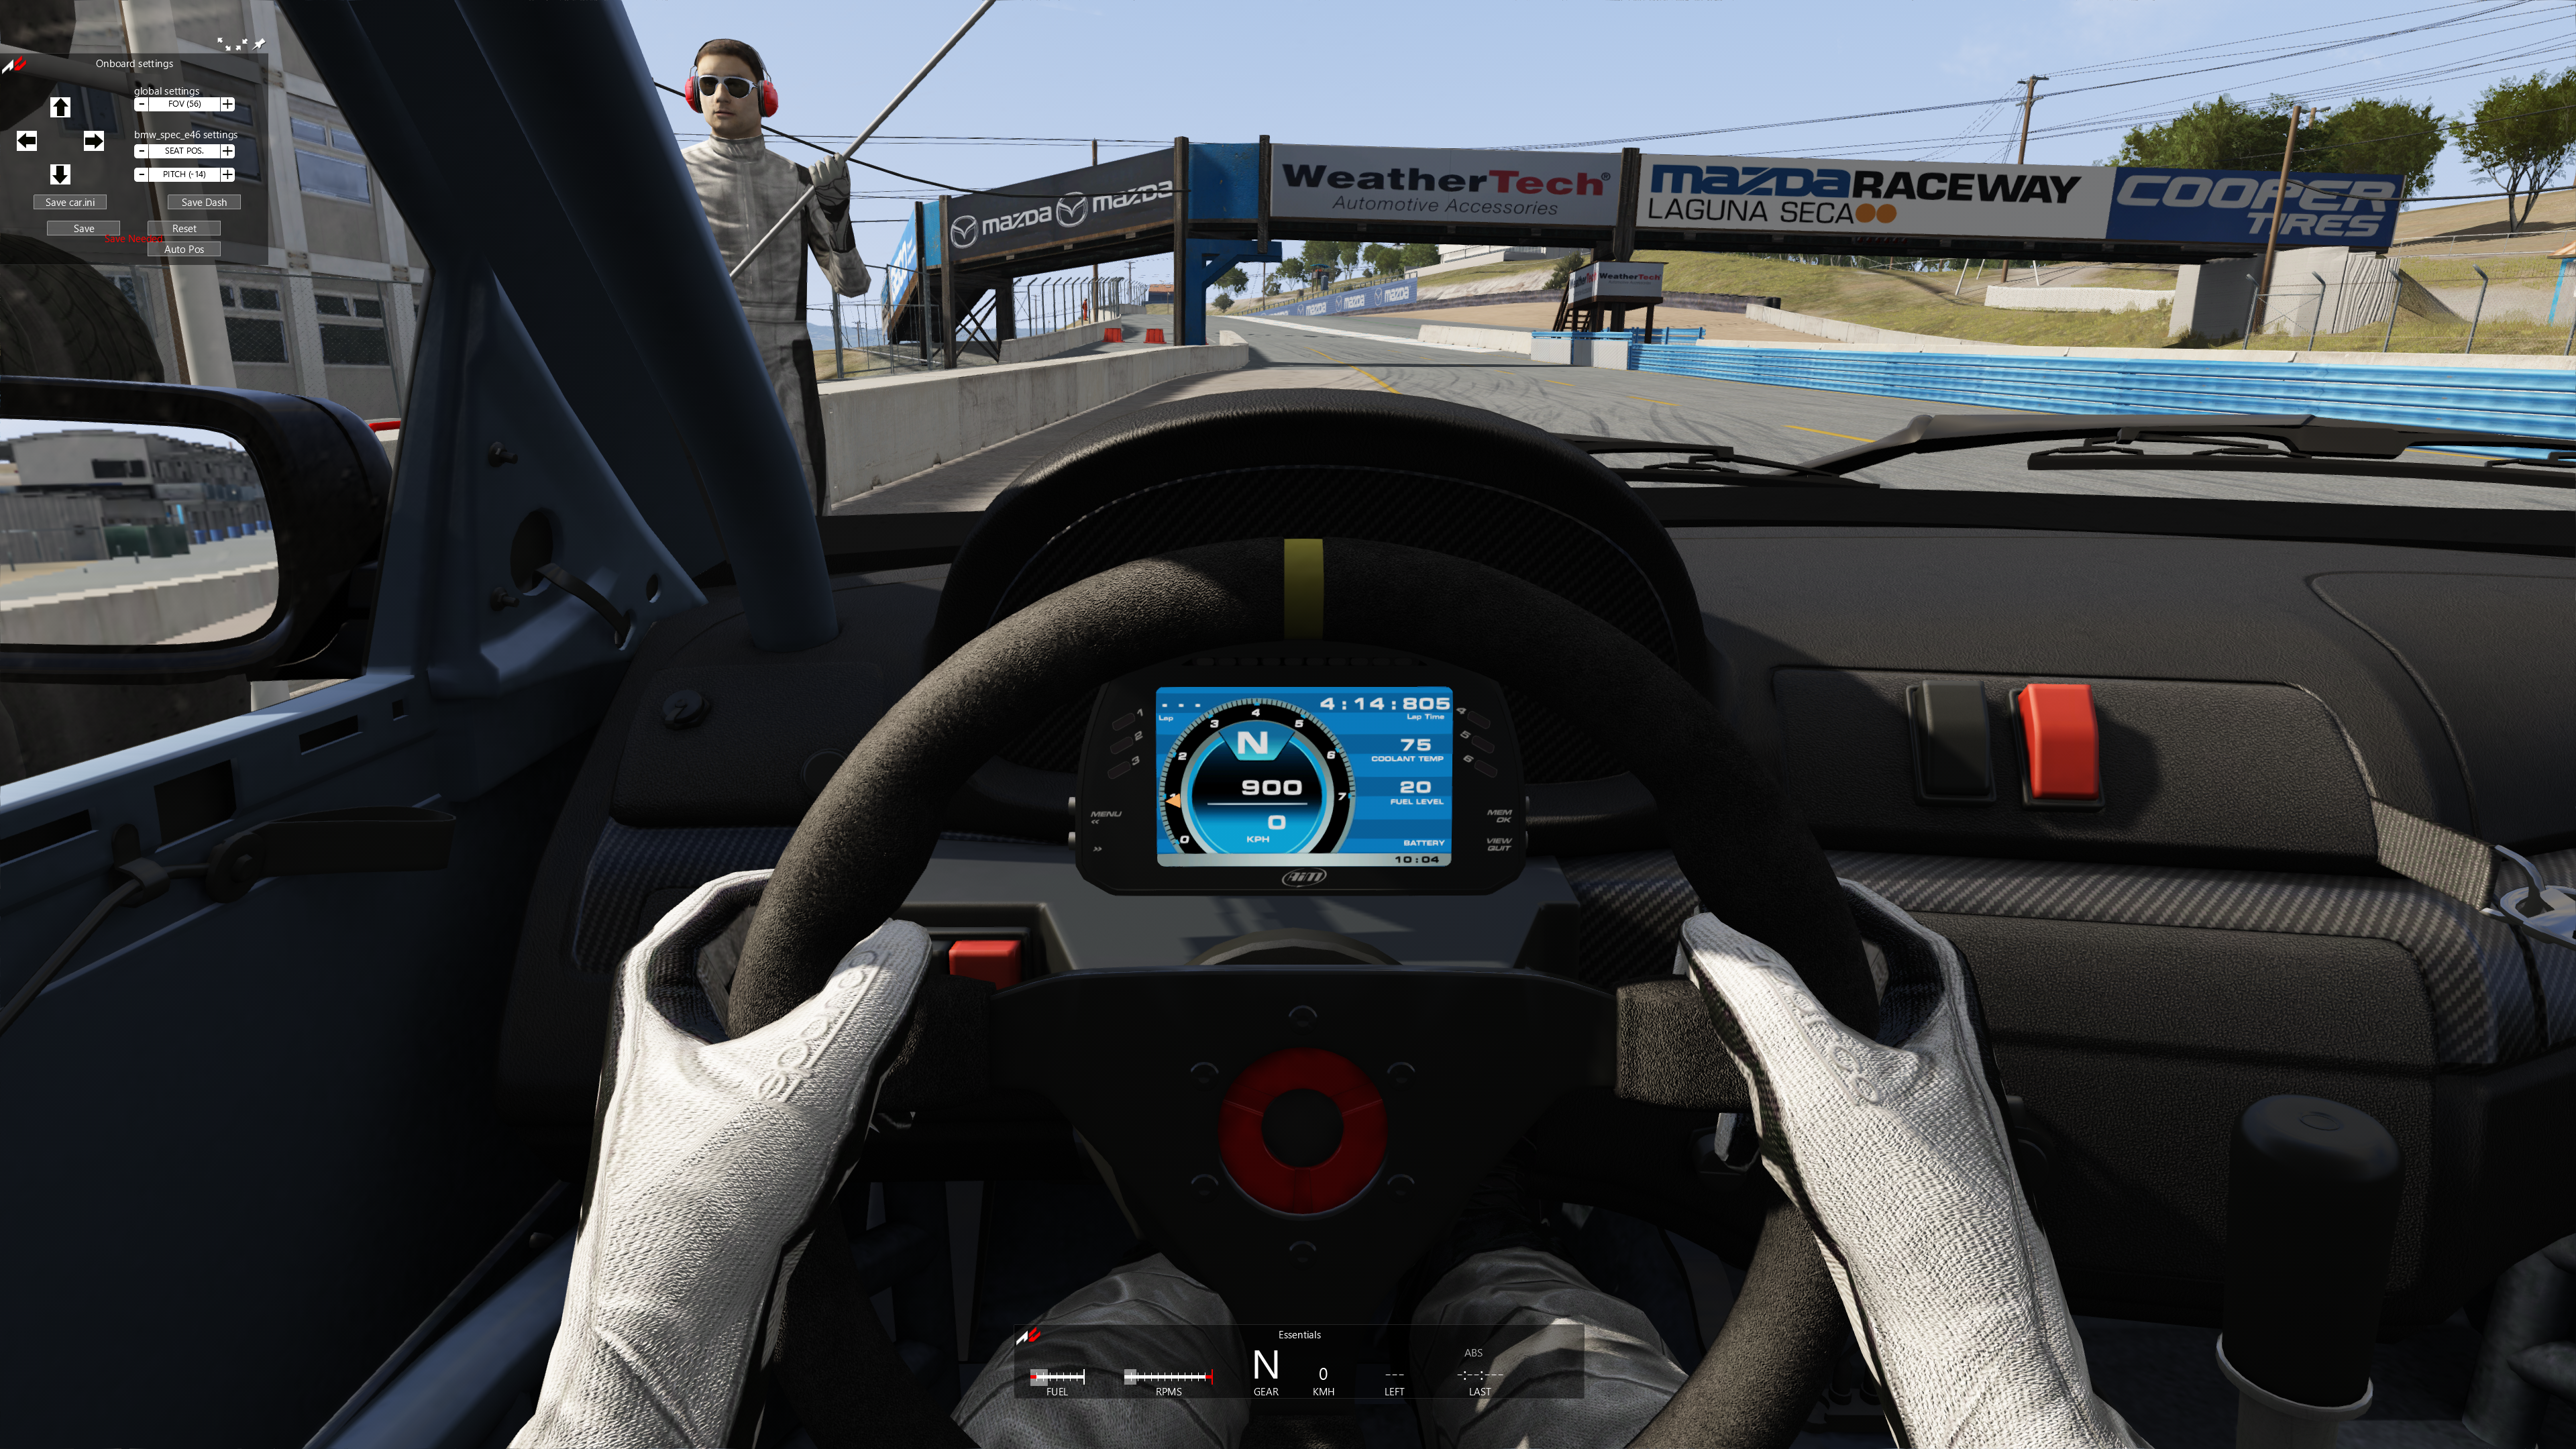 v1.2 of the Assetto Corsa Spec E46 is now available – Racer on